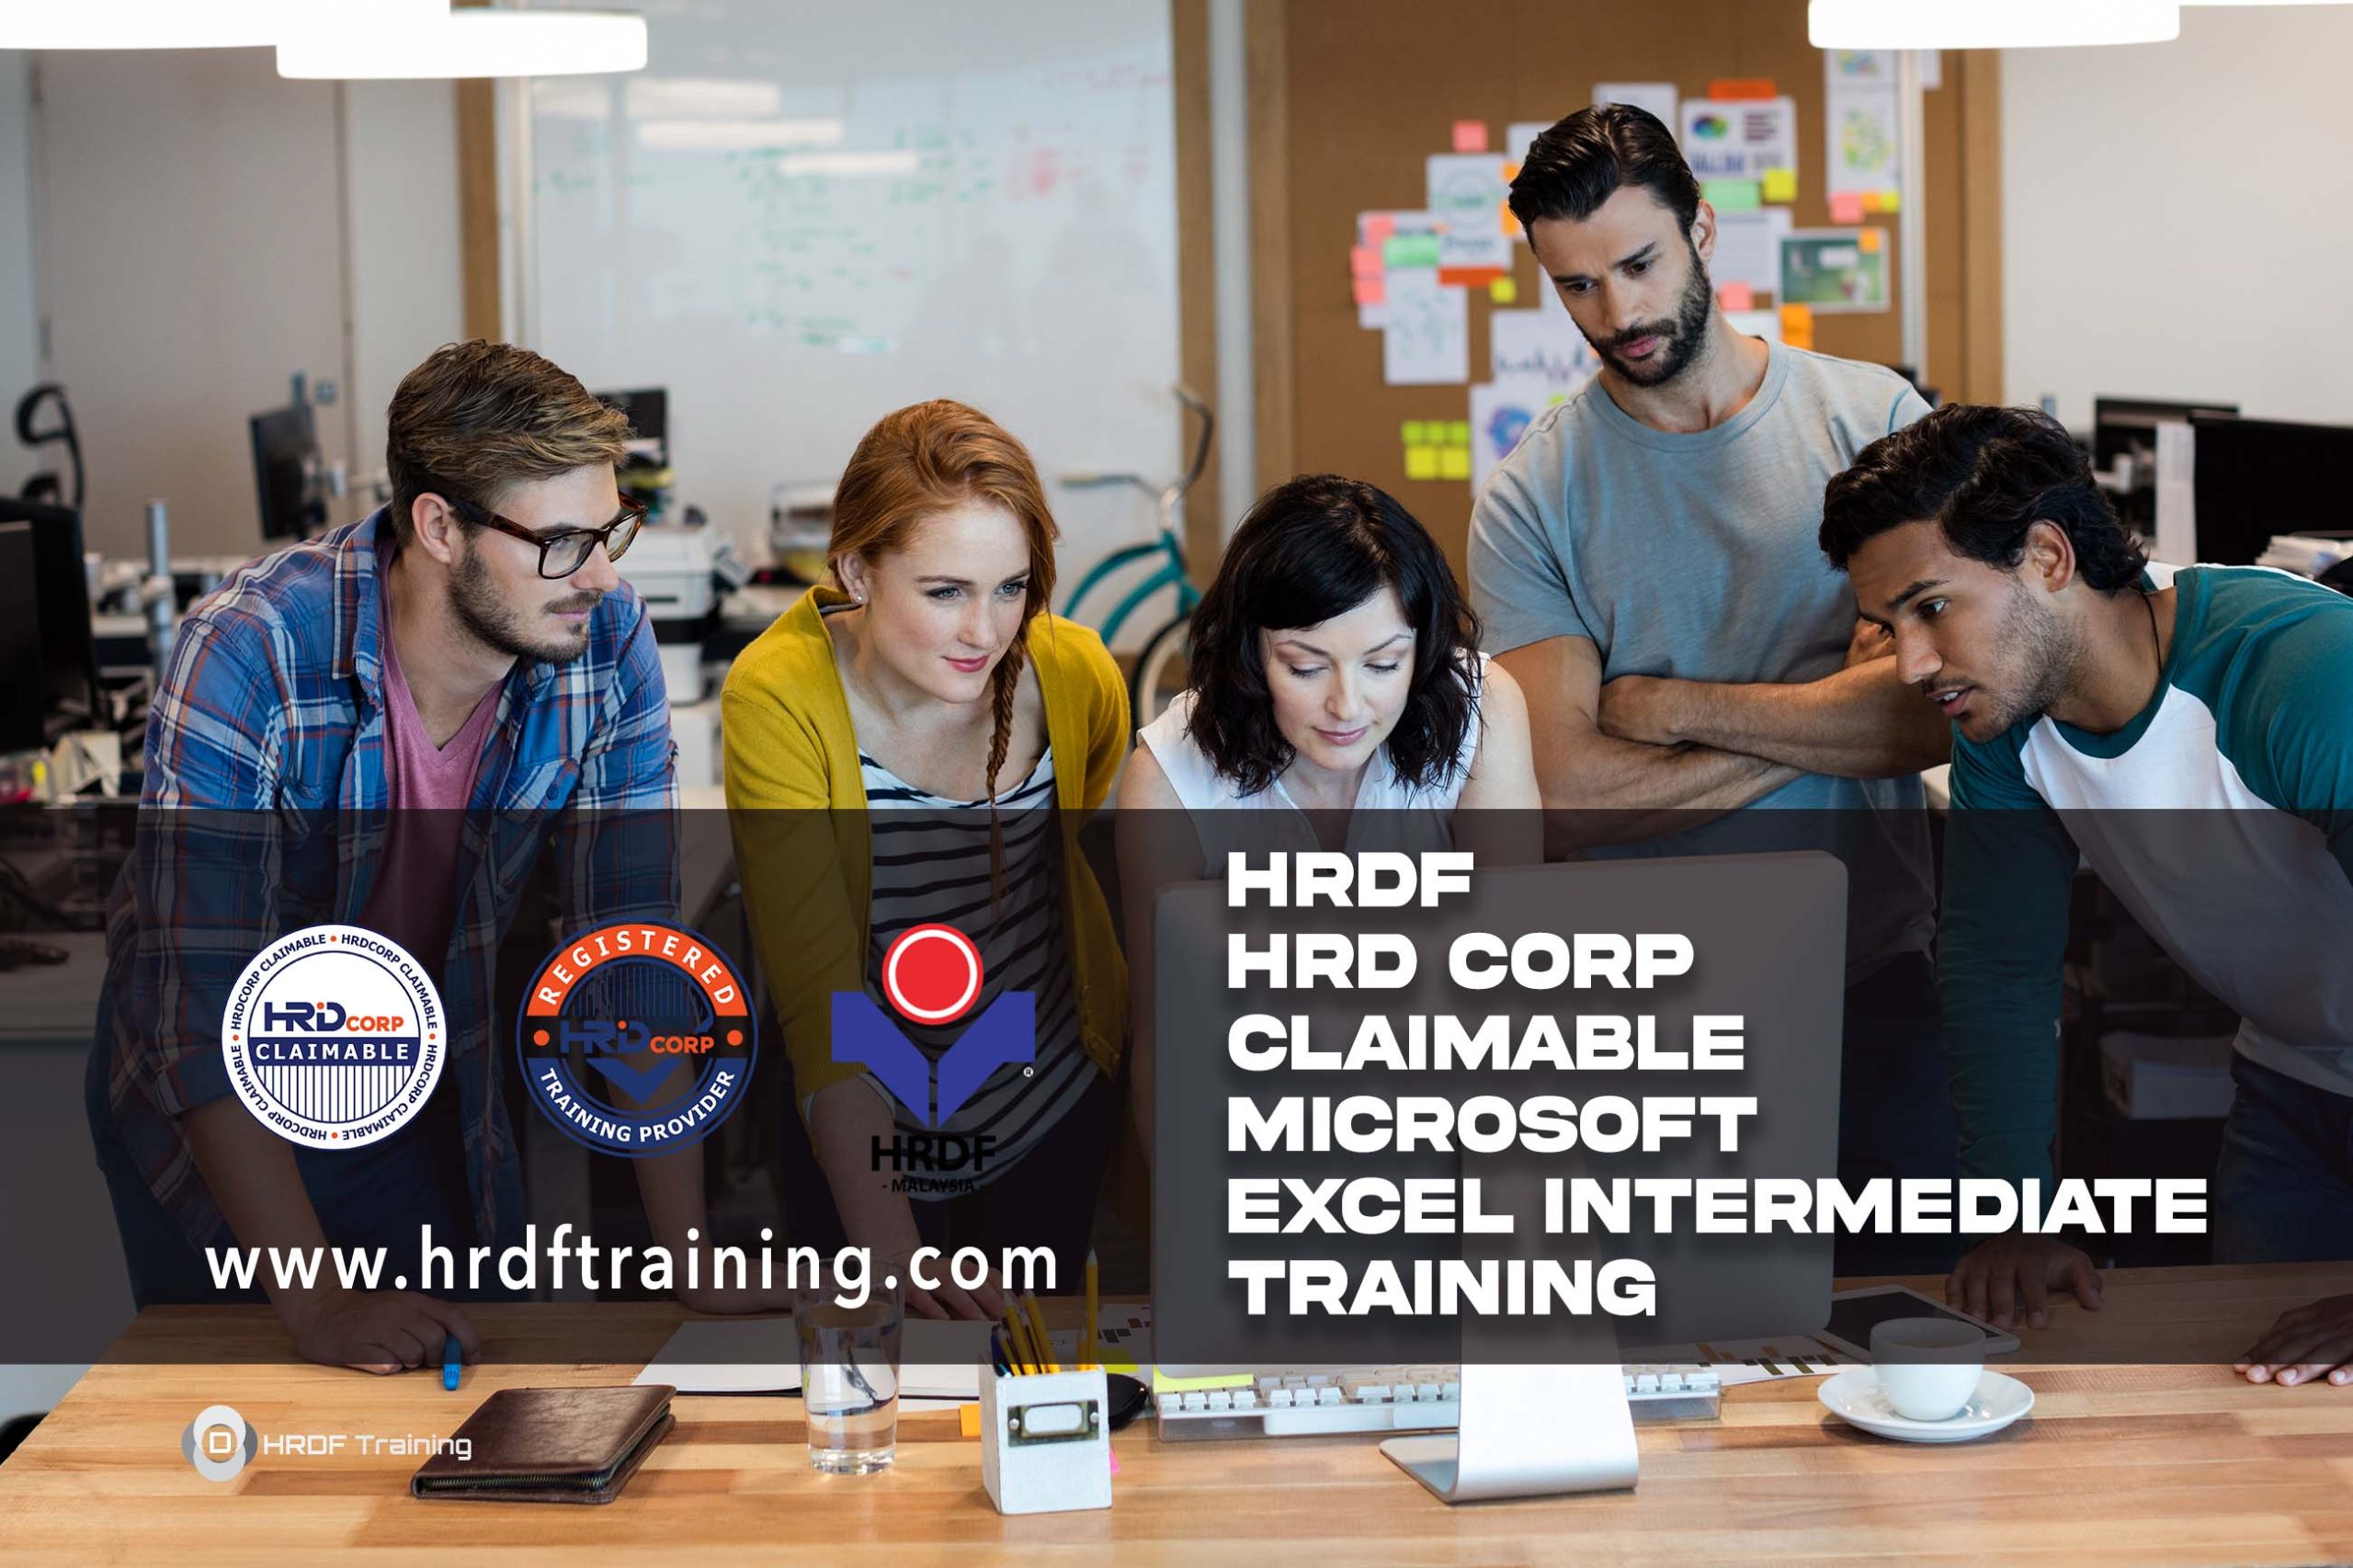 HRDF HRD Corp Claimable Microsoft Excel Intermediate Training